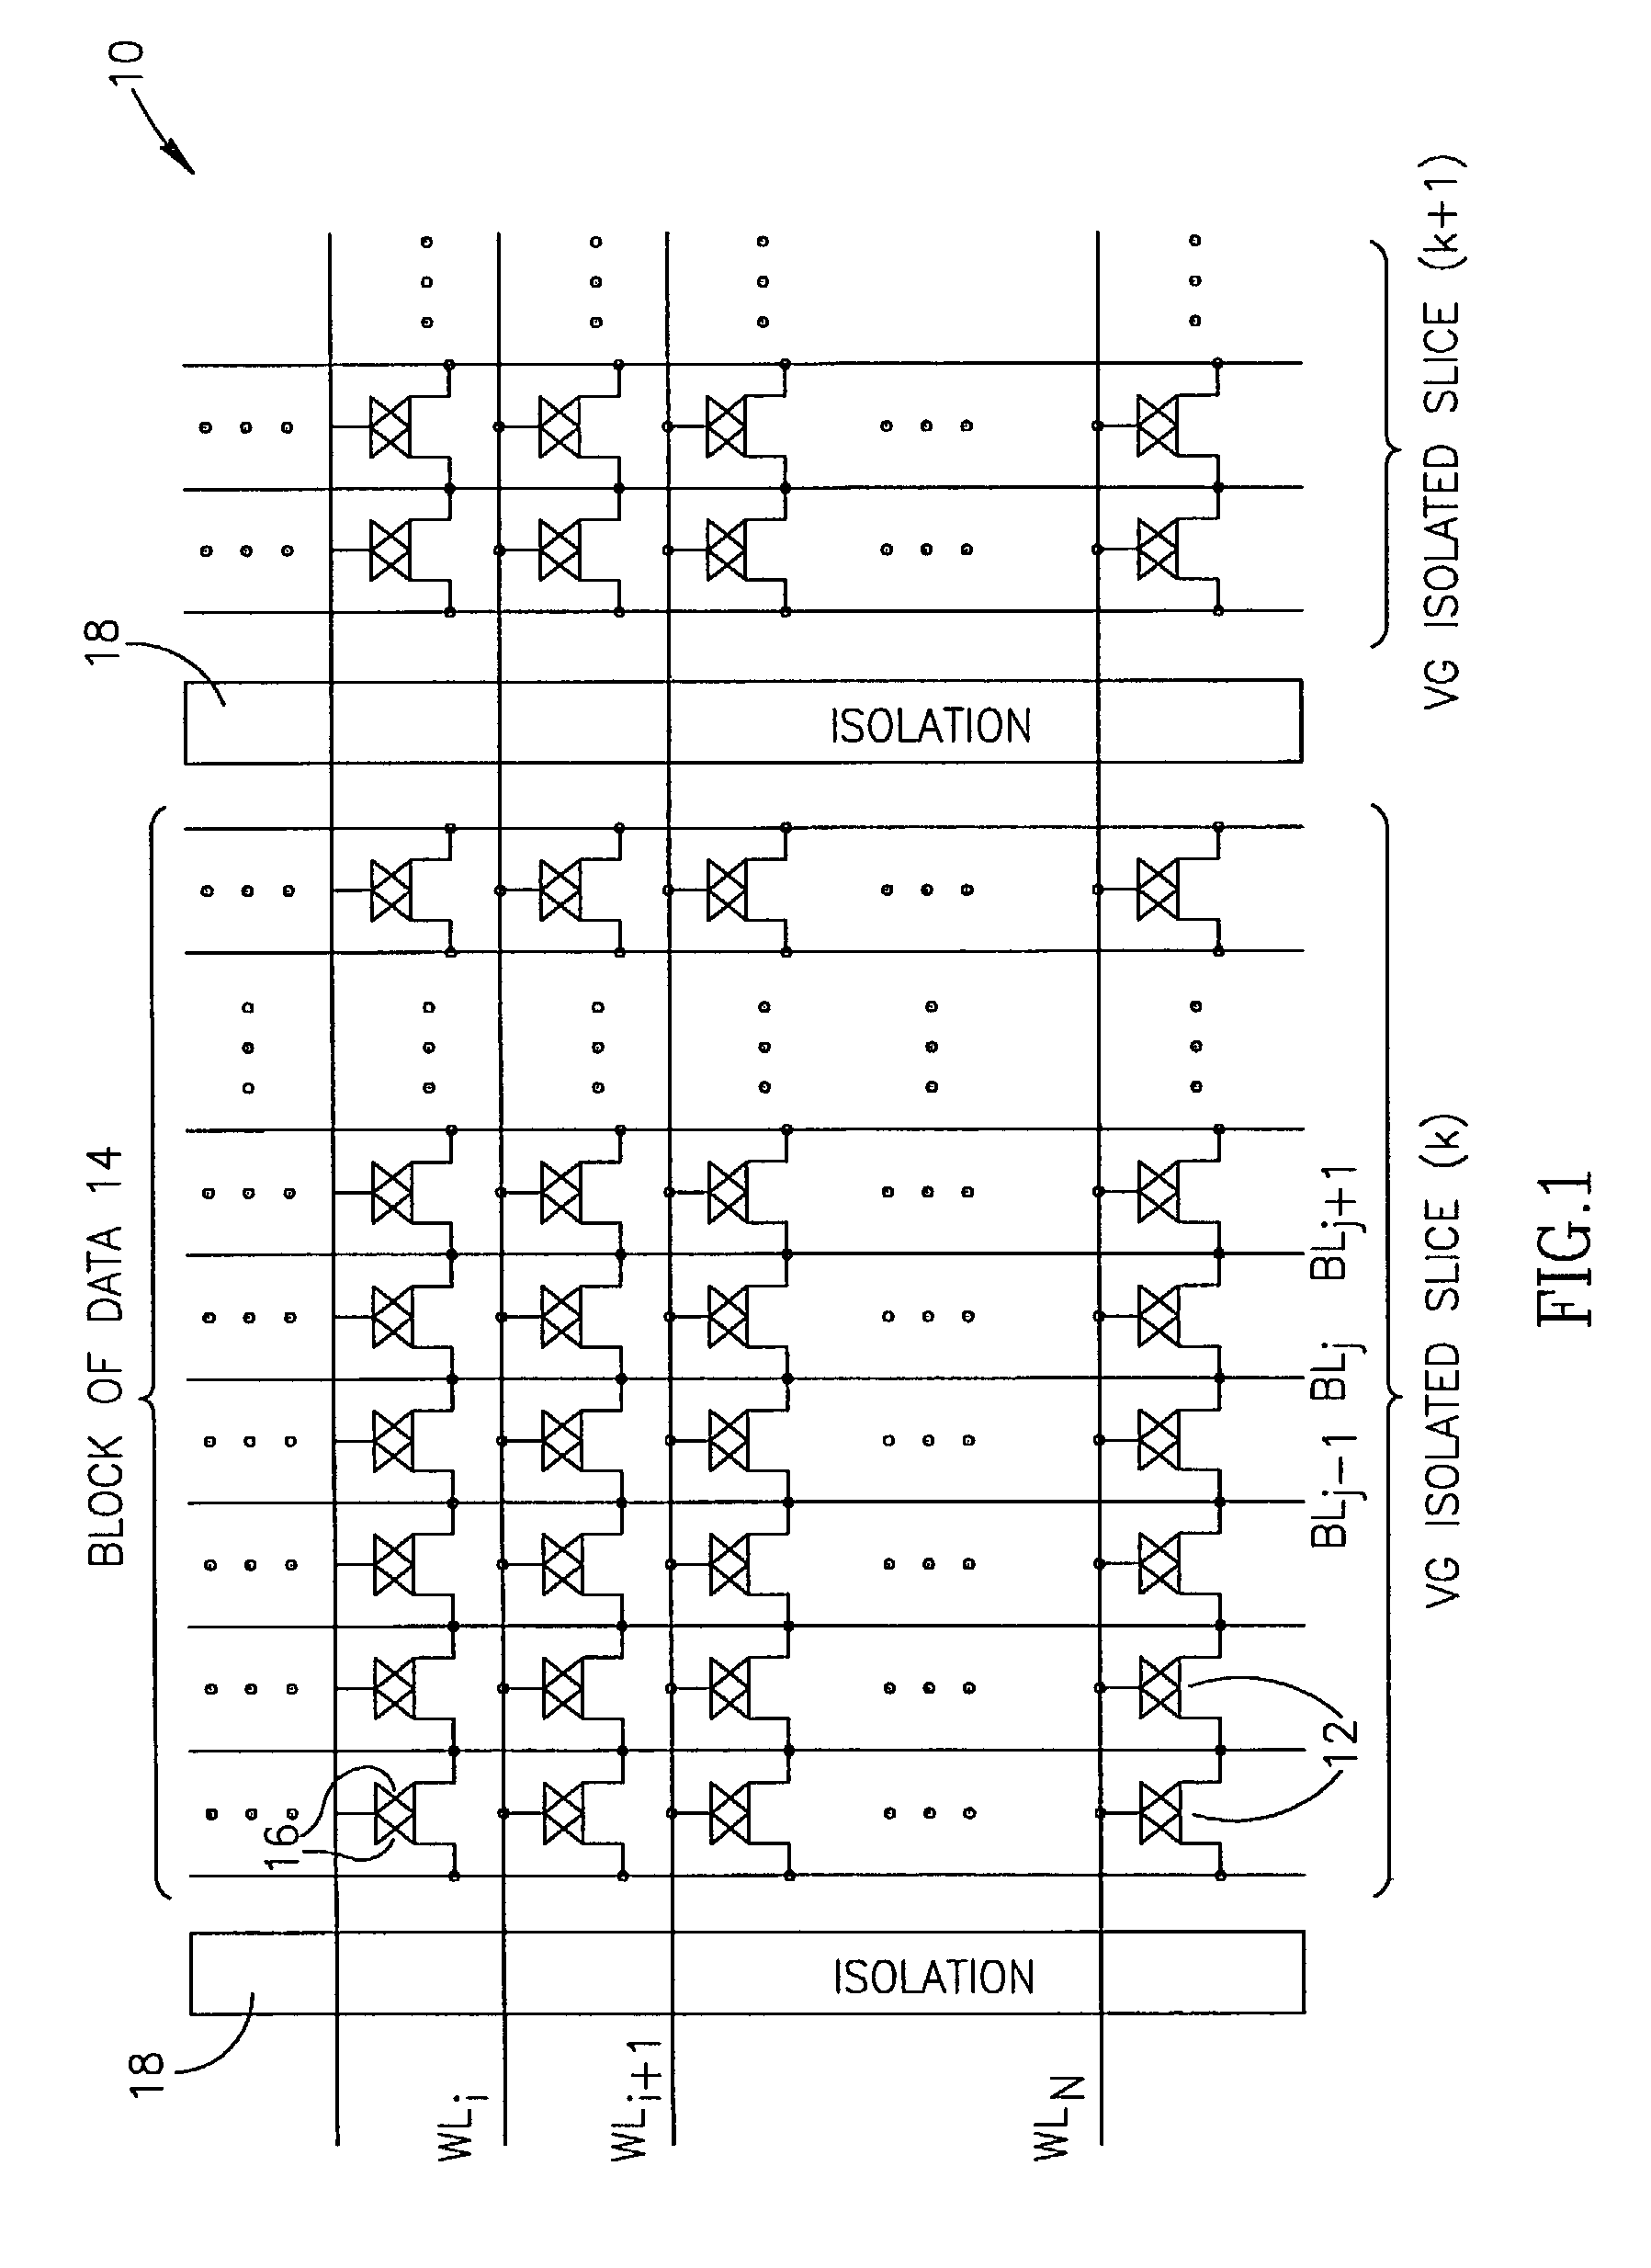 Mass storage array and methods for operation thereof